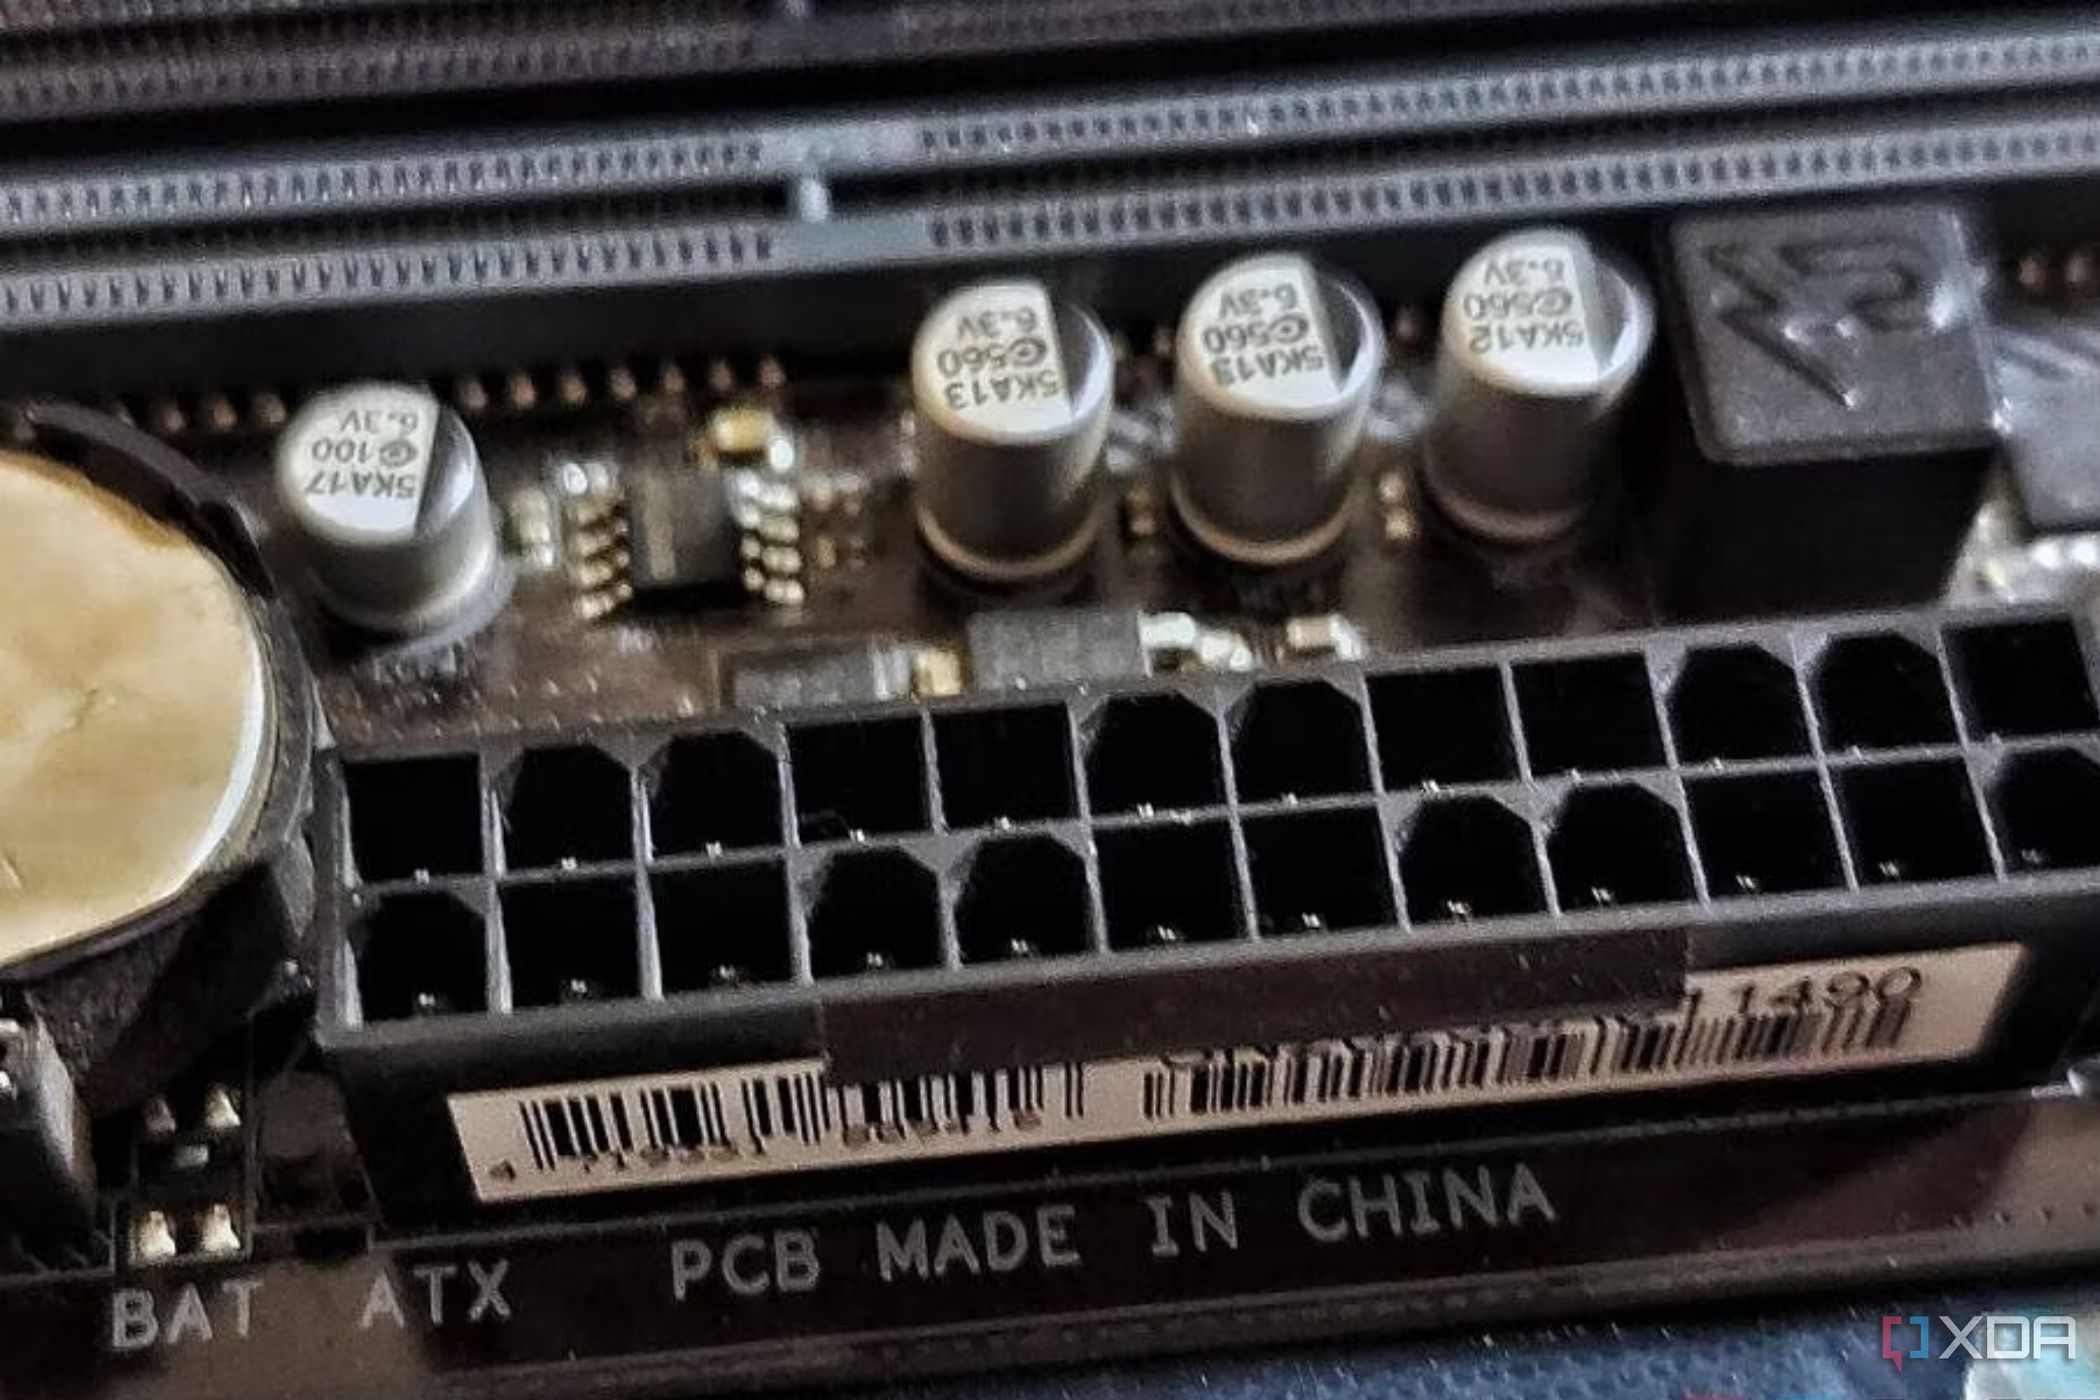 An image showing an ATX power connector on motherboard.